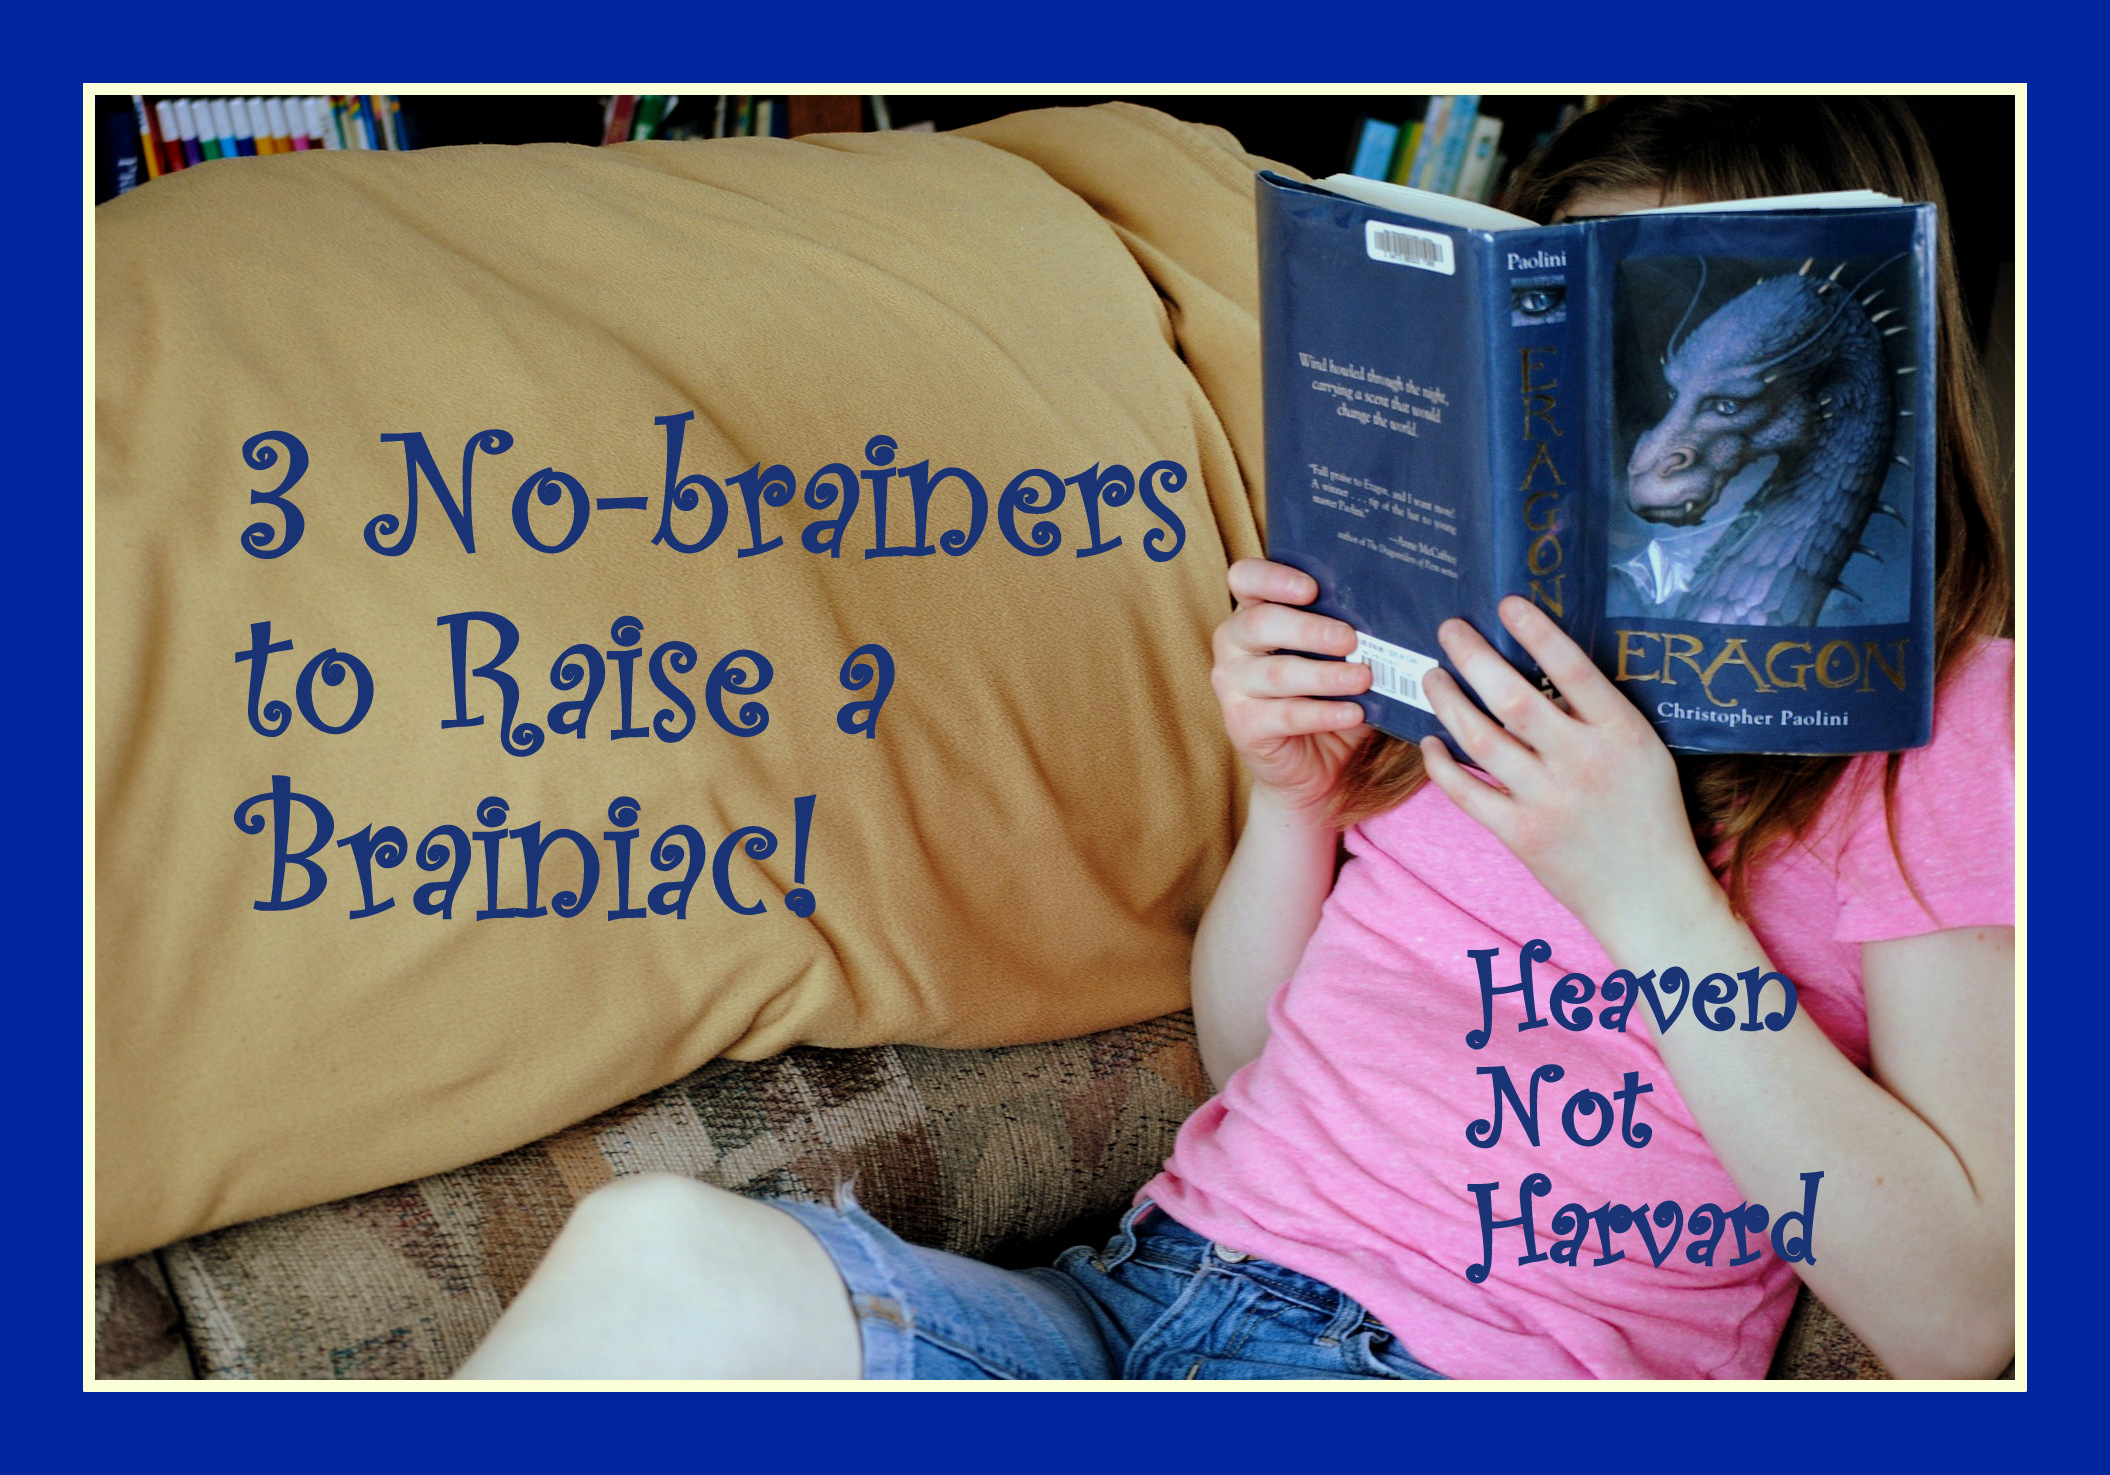 Some parenting is hard. Raising a brainiac doesn't have to be. 3 No-brainers to Raise a Brainiac! Heaven Not Harvard shares easy tips to start your child on a path to love learning.